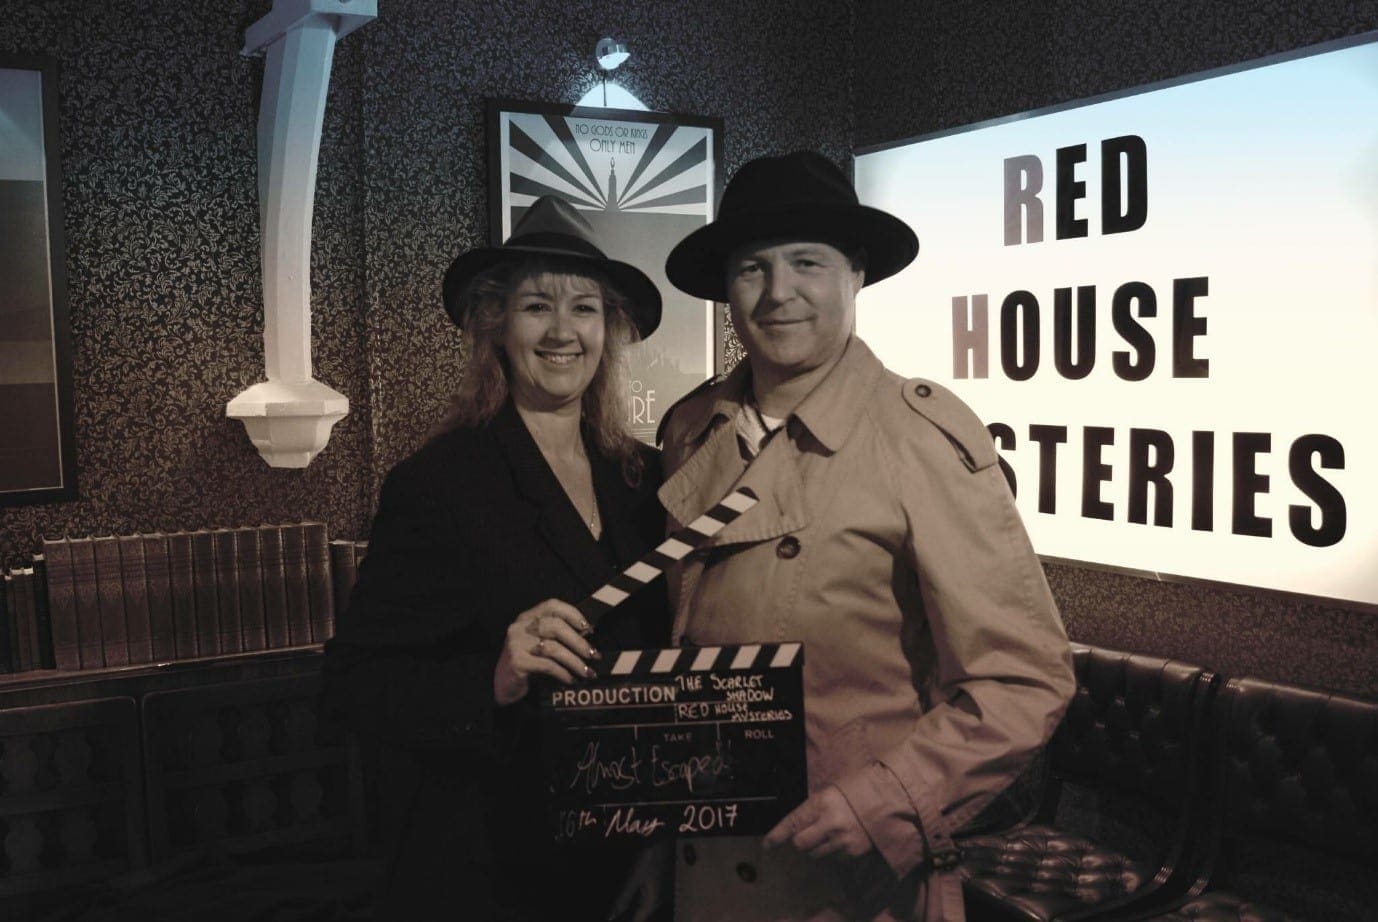 A photo of Julia and Darren with a clapperboard and in spy outfits